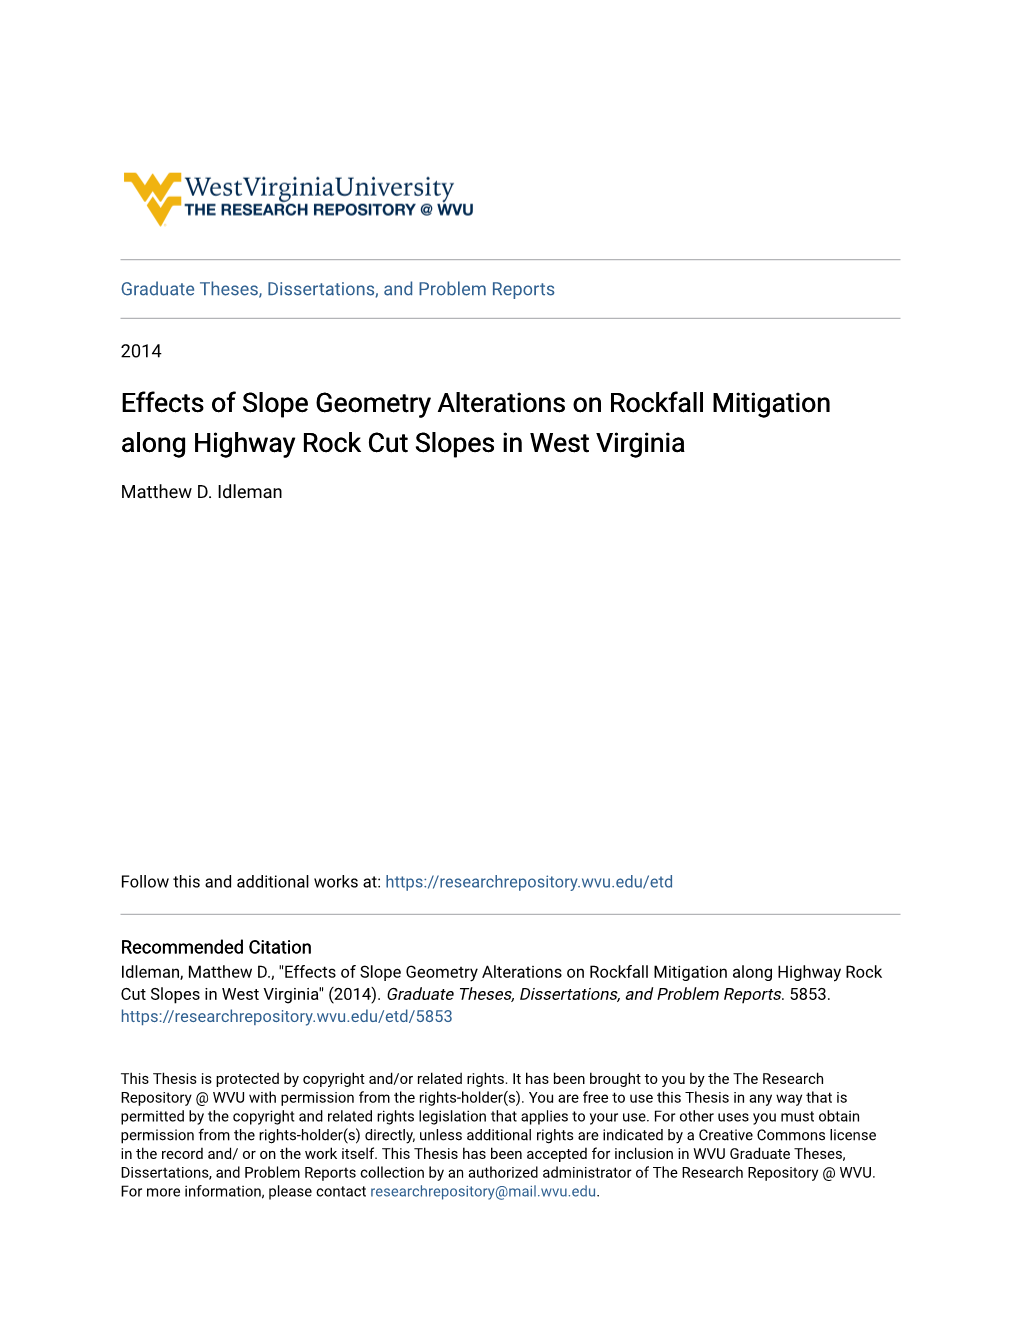 Effects of Slope Geometry Alterations on Rockfall Mitigation Along Highway Rock Cut Slopes in West Virginia